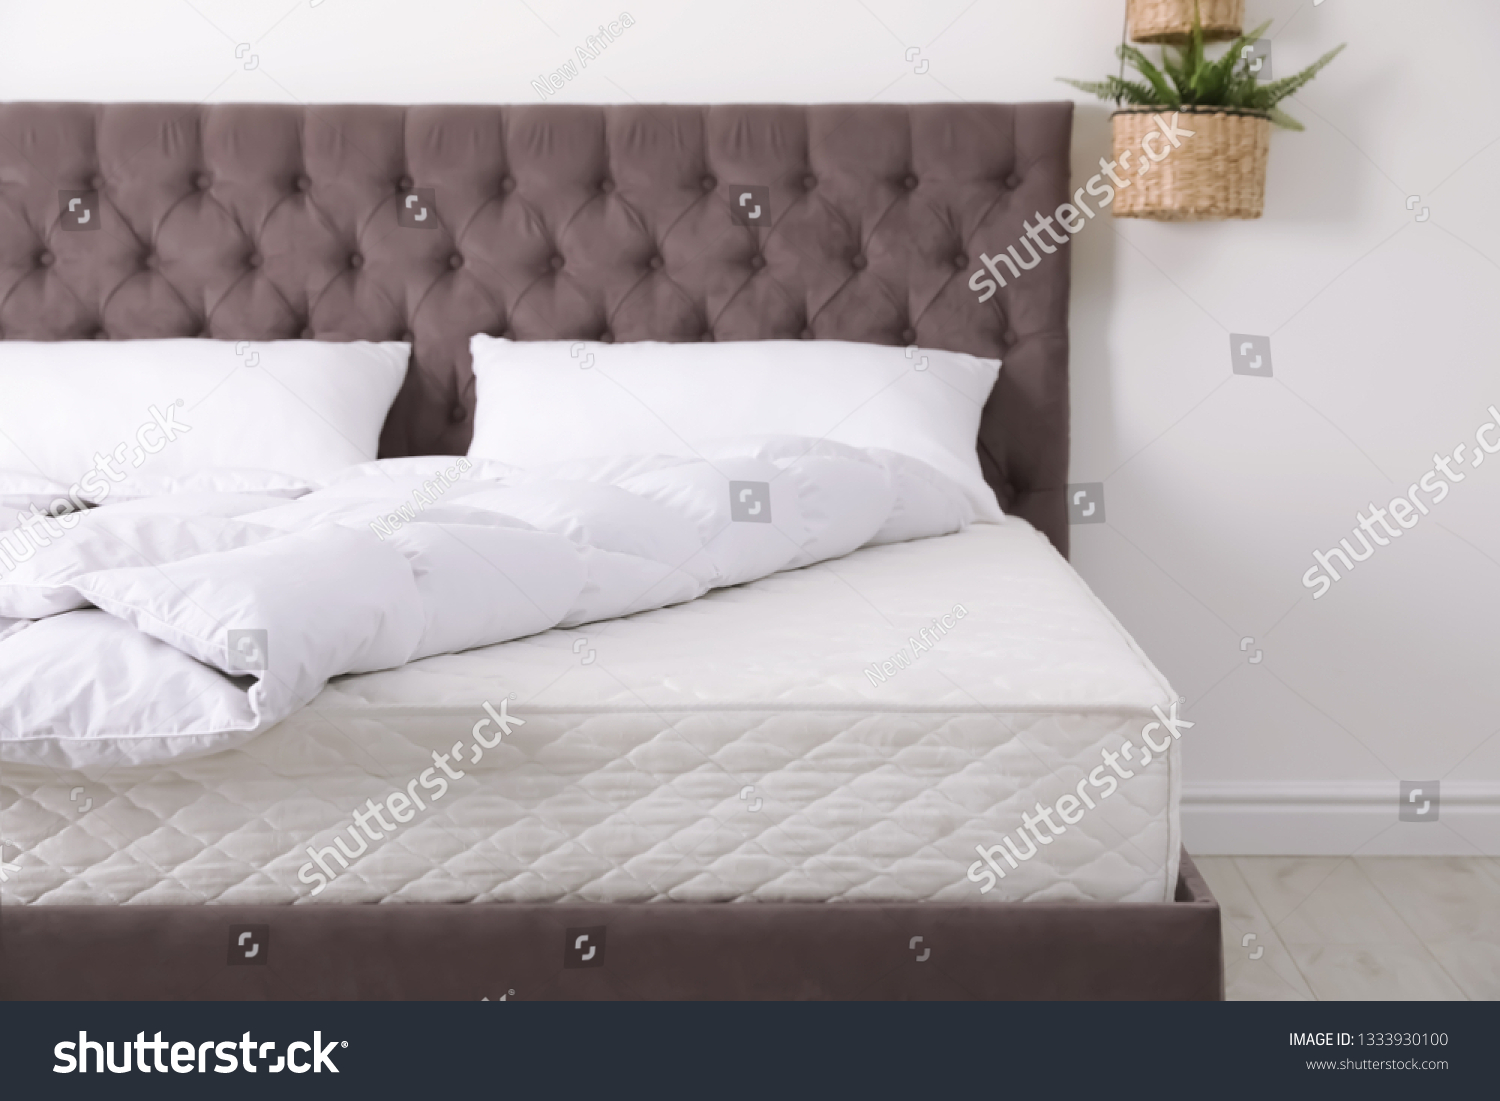 Comfortable bed with new mattress in room. Healthy sleep #1333930100